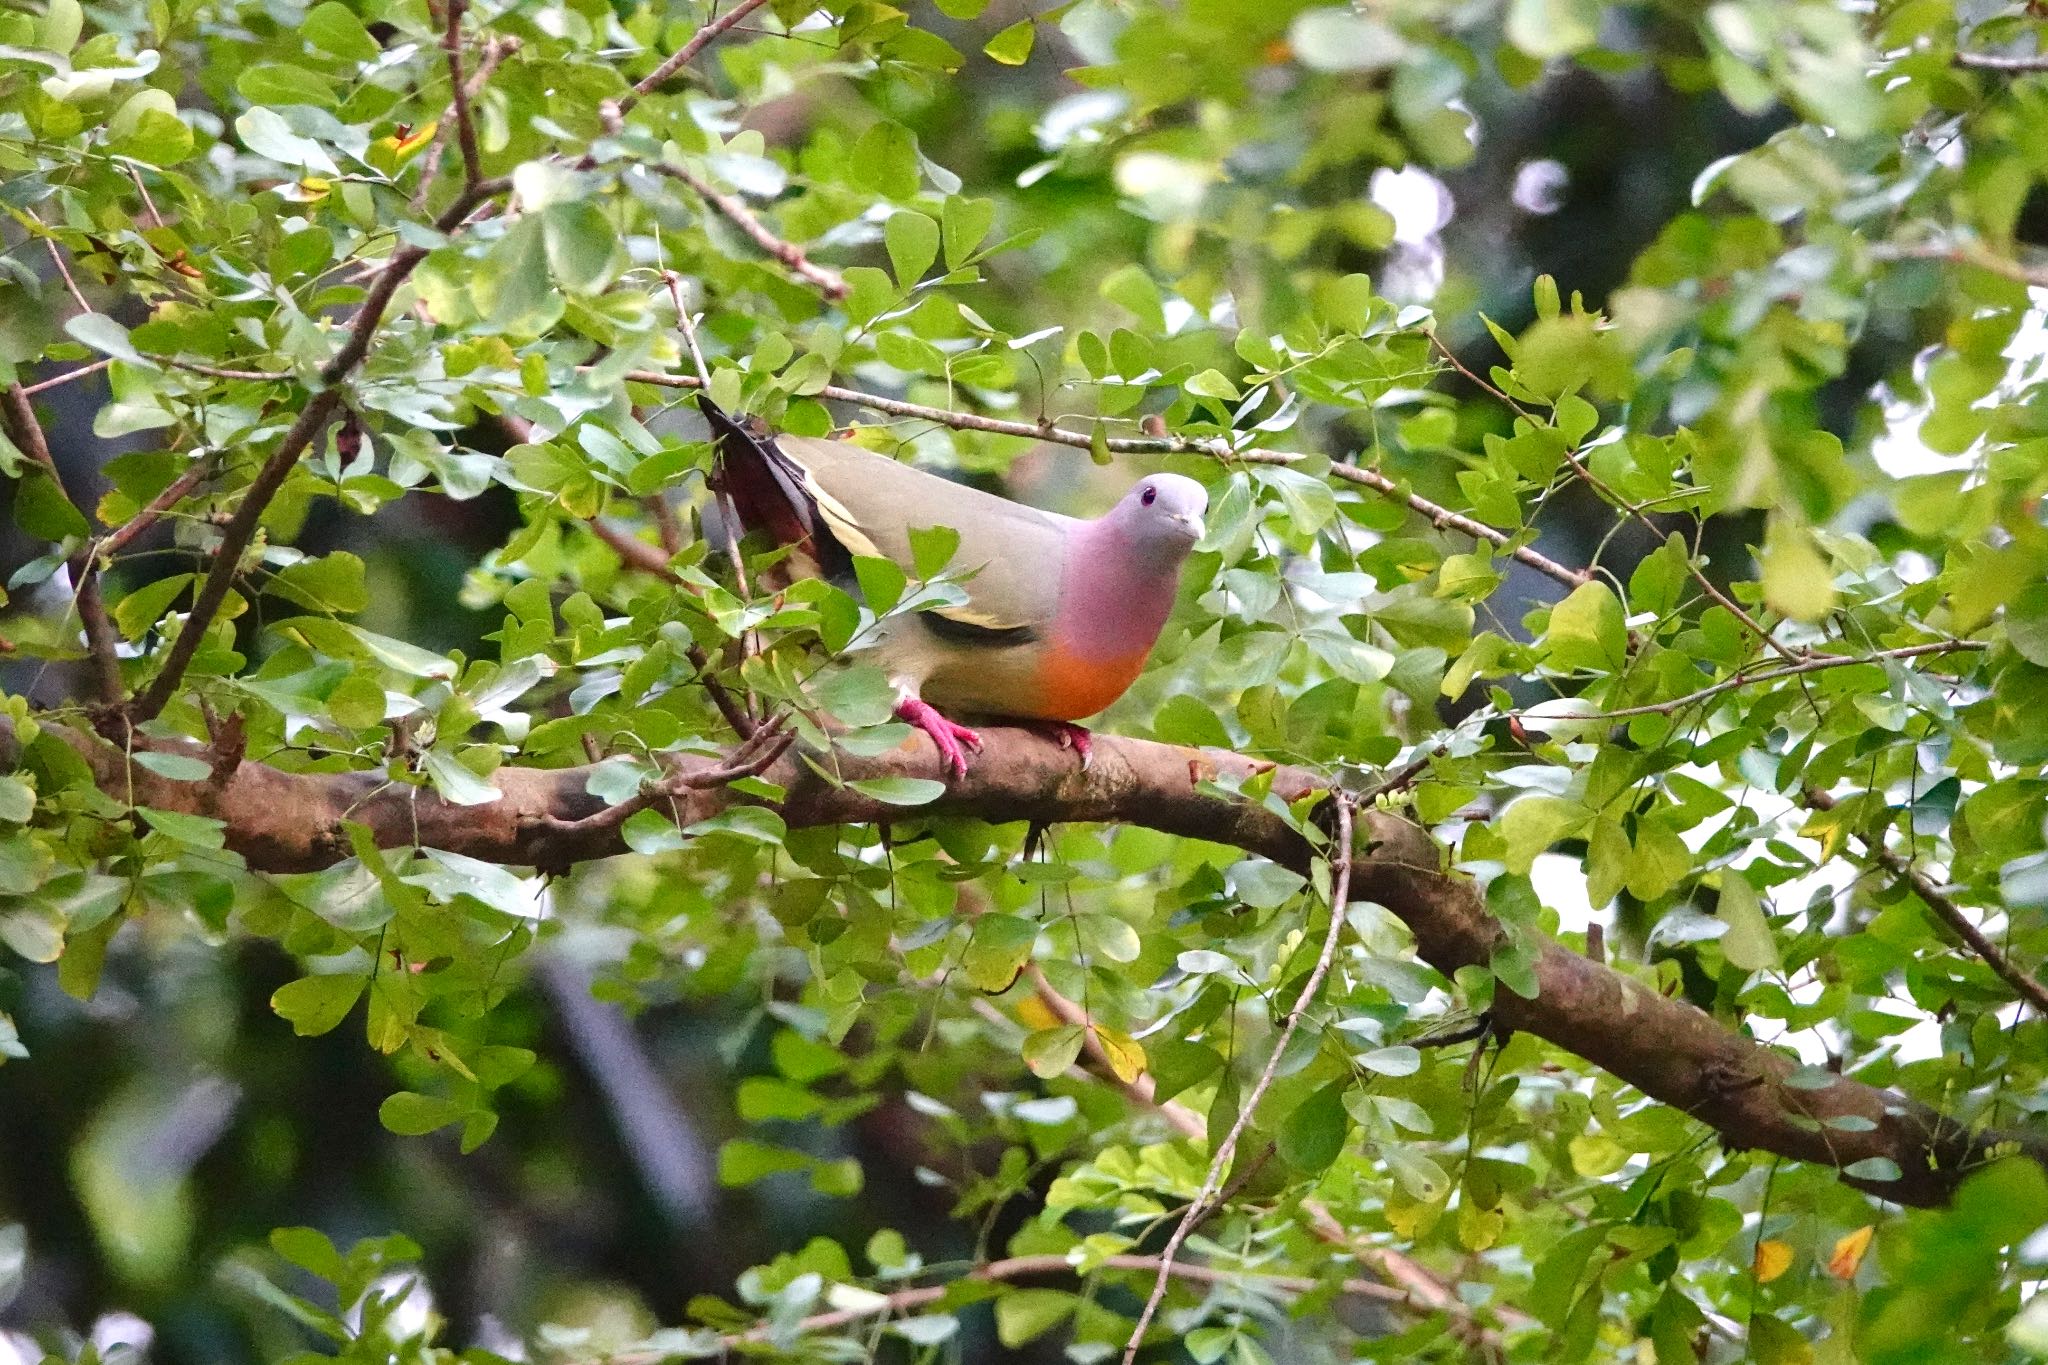 Photo of Pink-necked Green Pigeon at Singapore Botanic Gardens by のどか